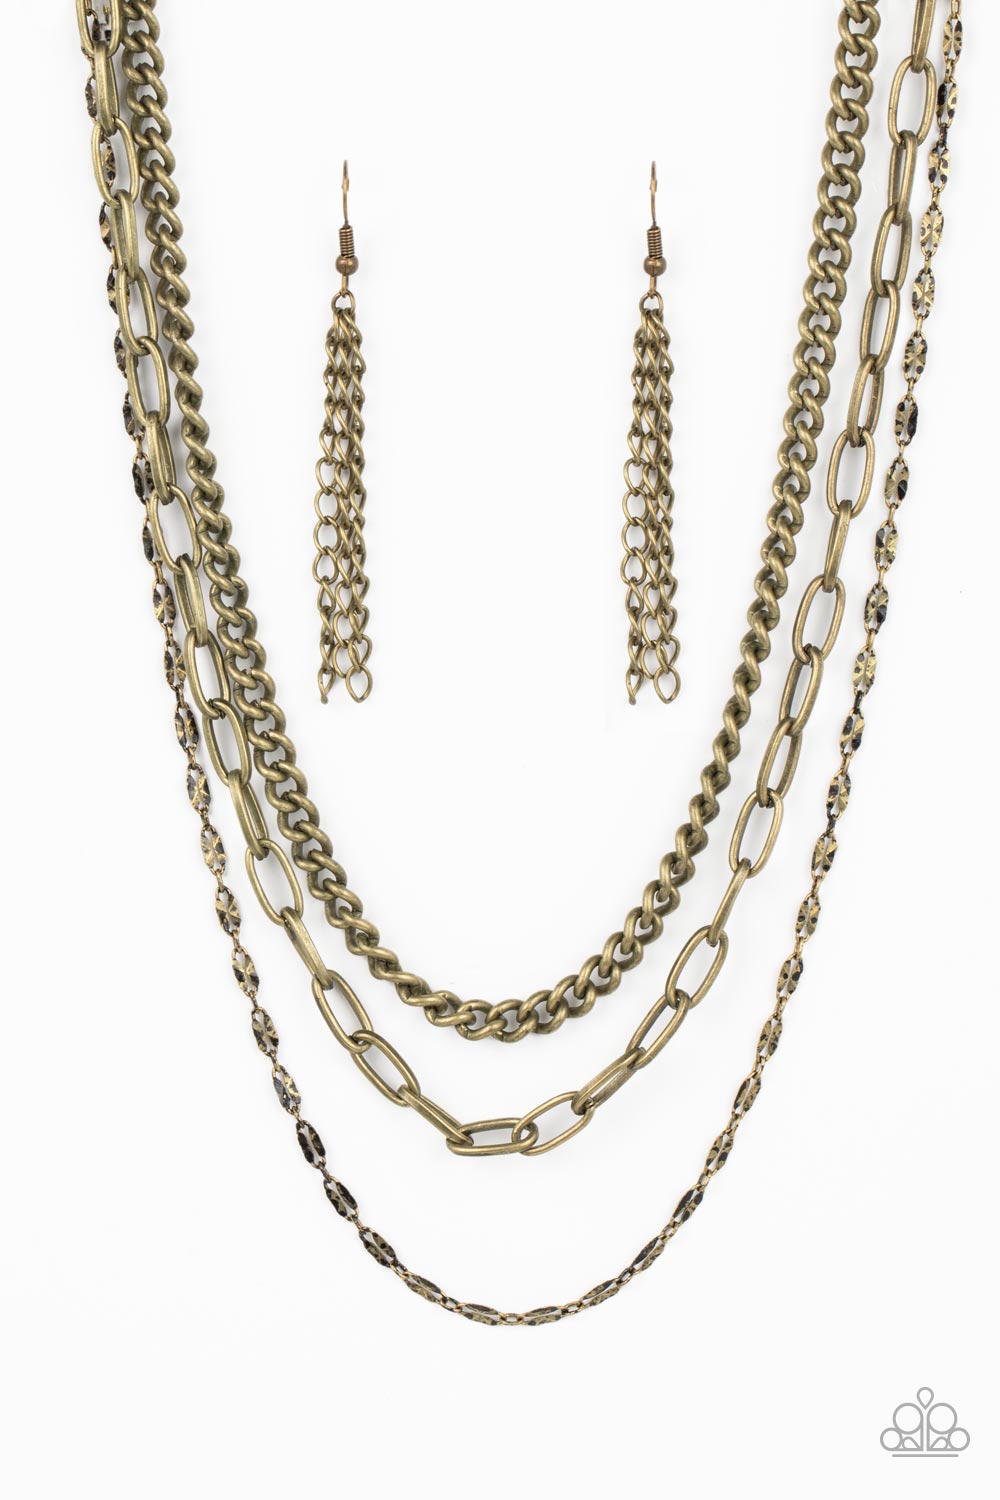 Galvanized Grit - Brass Necklace - Paparazzi Accessories - Three different kinds of weighted brass chains layer down the neck to create a gritty, edgy statement piece. Features an adjustable clasp. Sold as one individual necklace.